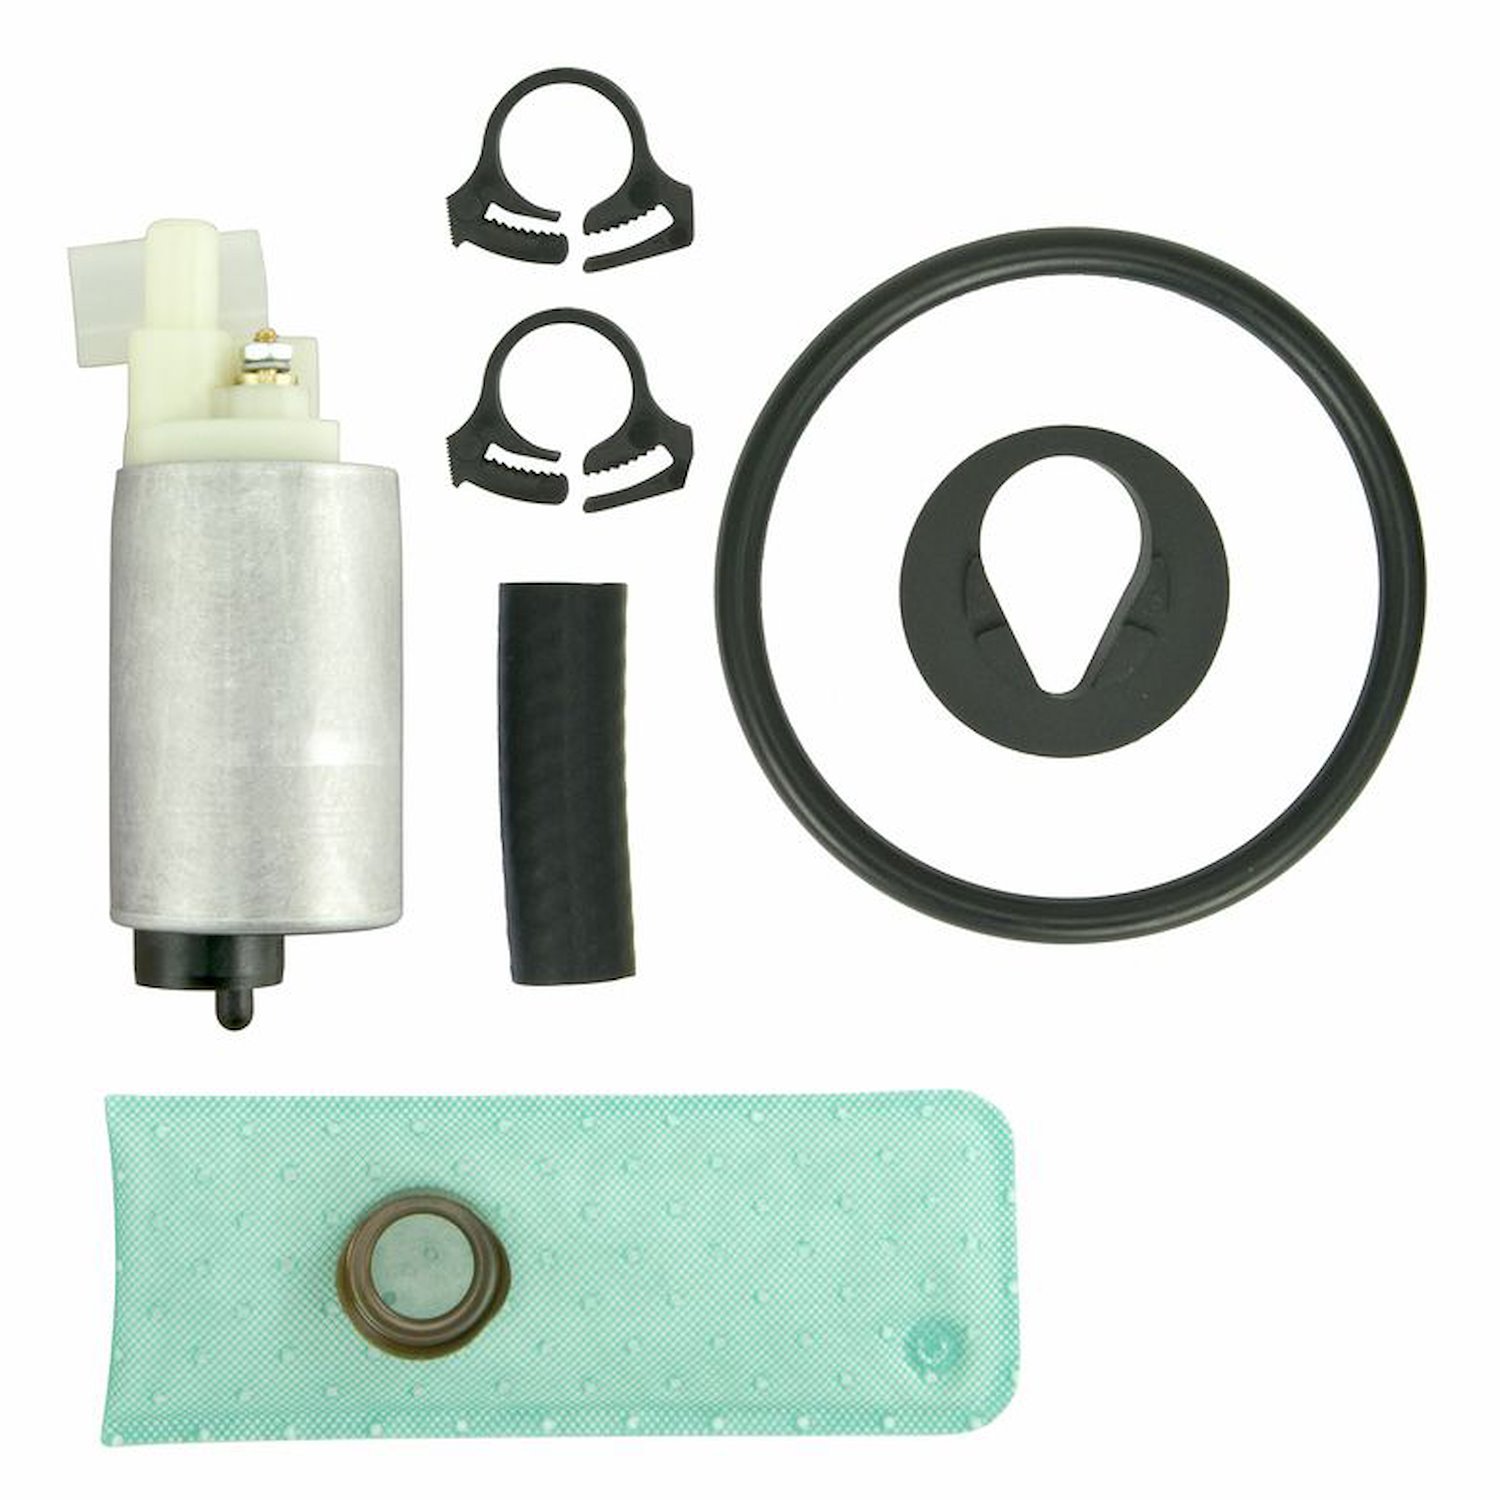 EFI In-Tank Electric Fuel Pump And Strainer Set for 1979-1984 GM Vehicles